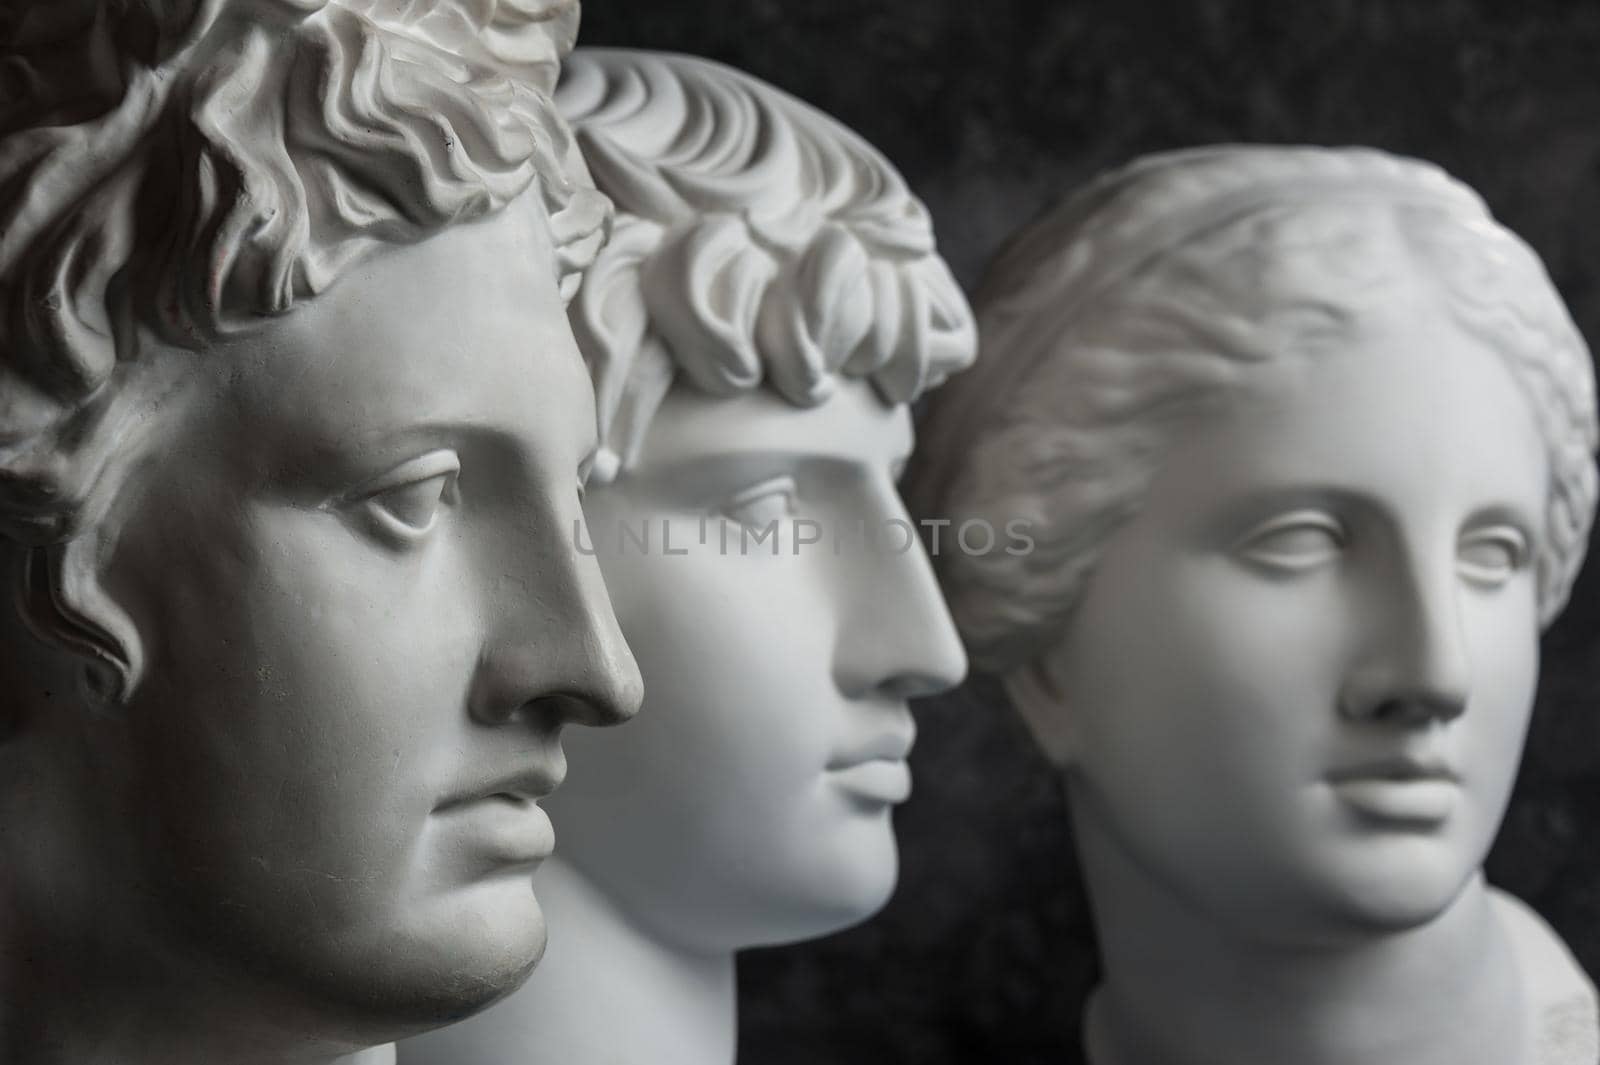 White gypsum copy of ancient statue of Apollo, Antinous and Venus head for artists on a dark textured background. Plaster sculpture of statue face.